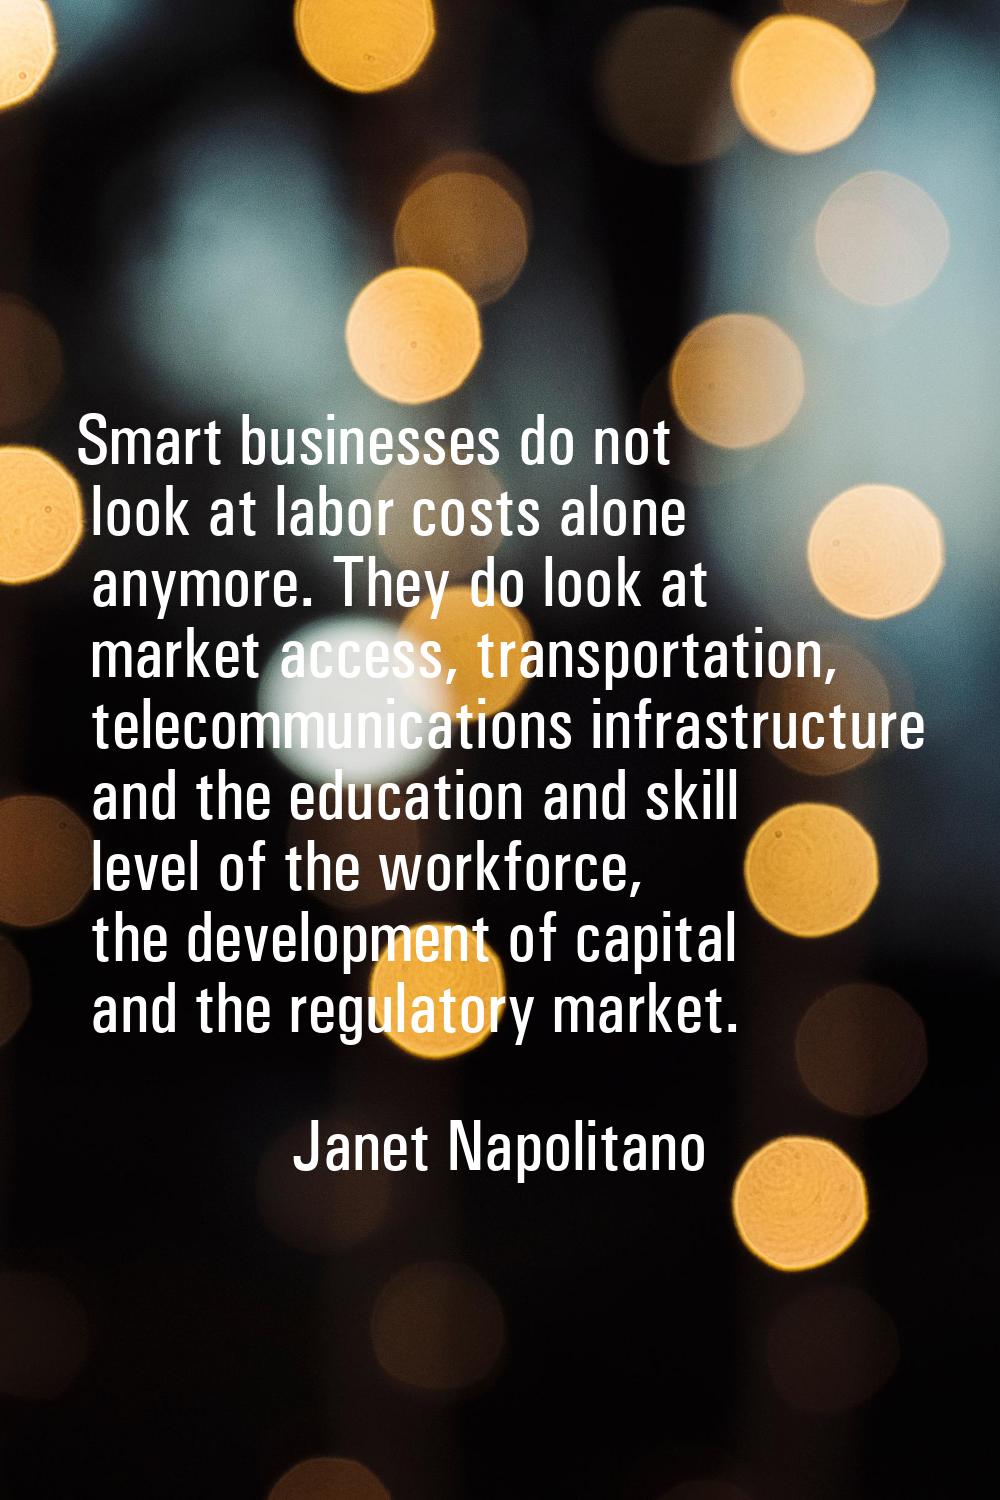 Smart businesses do not look at labor costs alone anymore. They do look at market access, transport